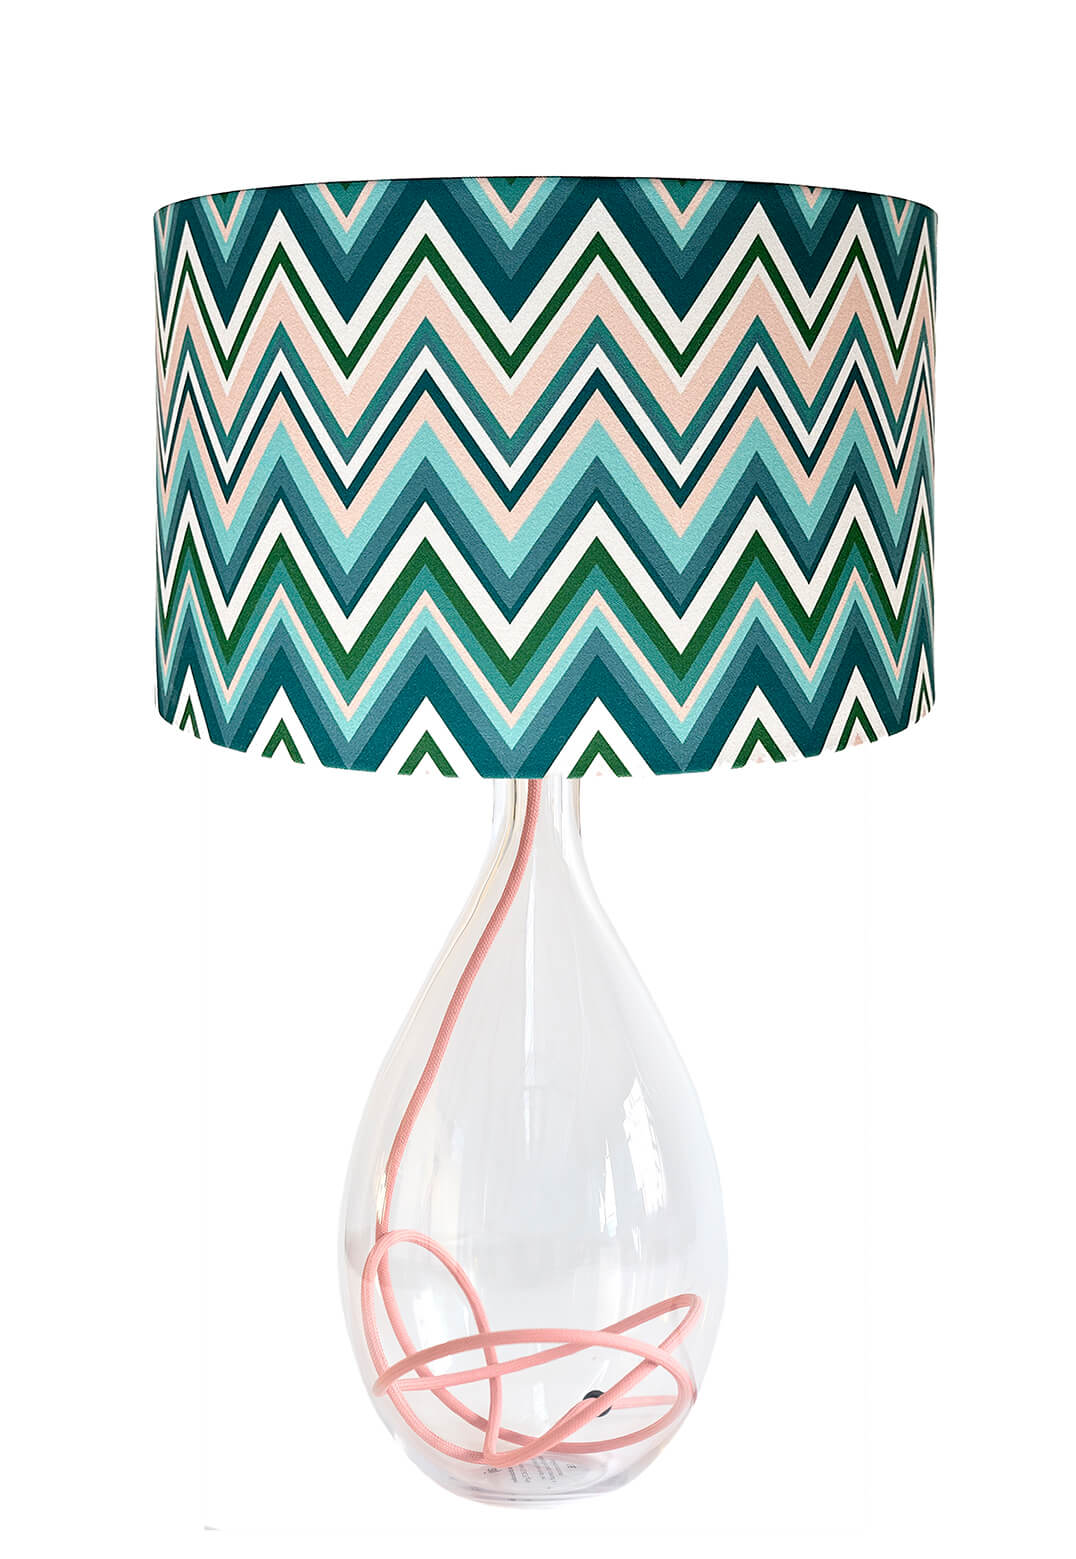 Zig Zag in Blue Fig large lamp